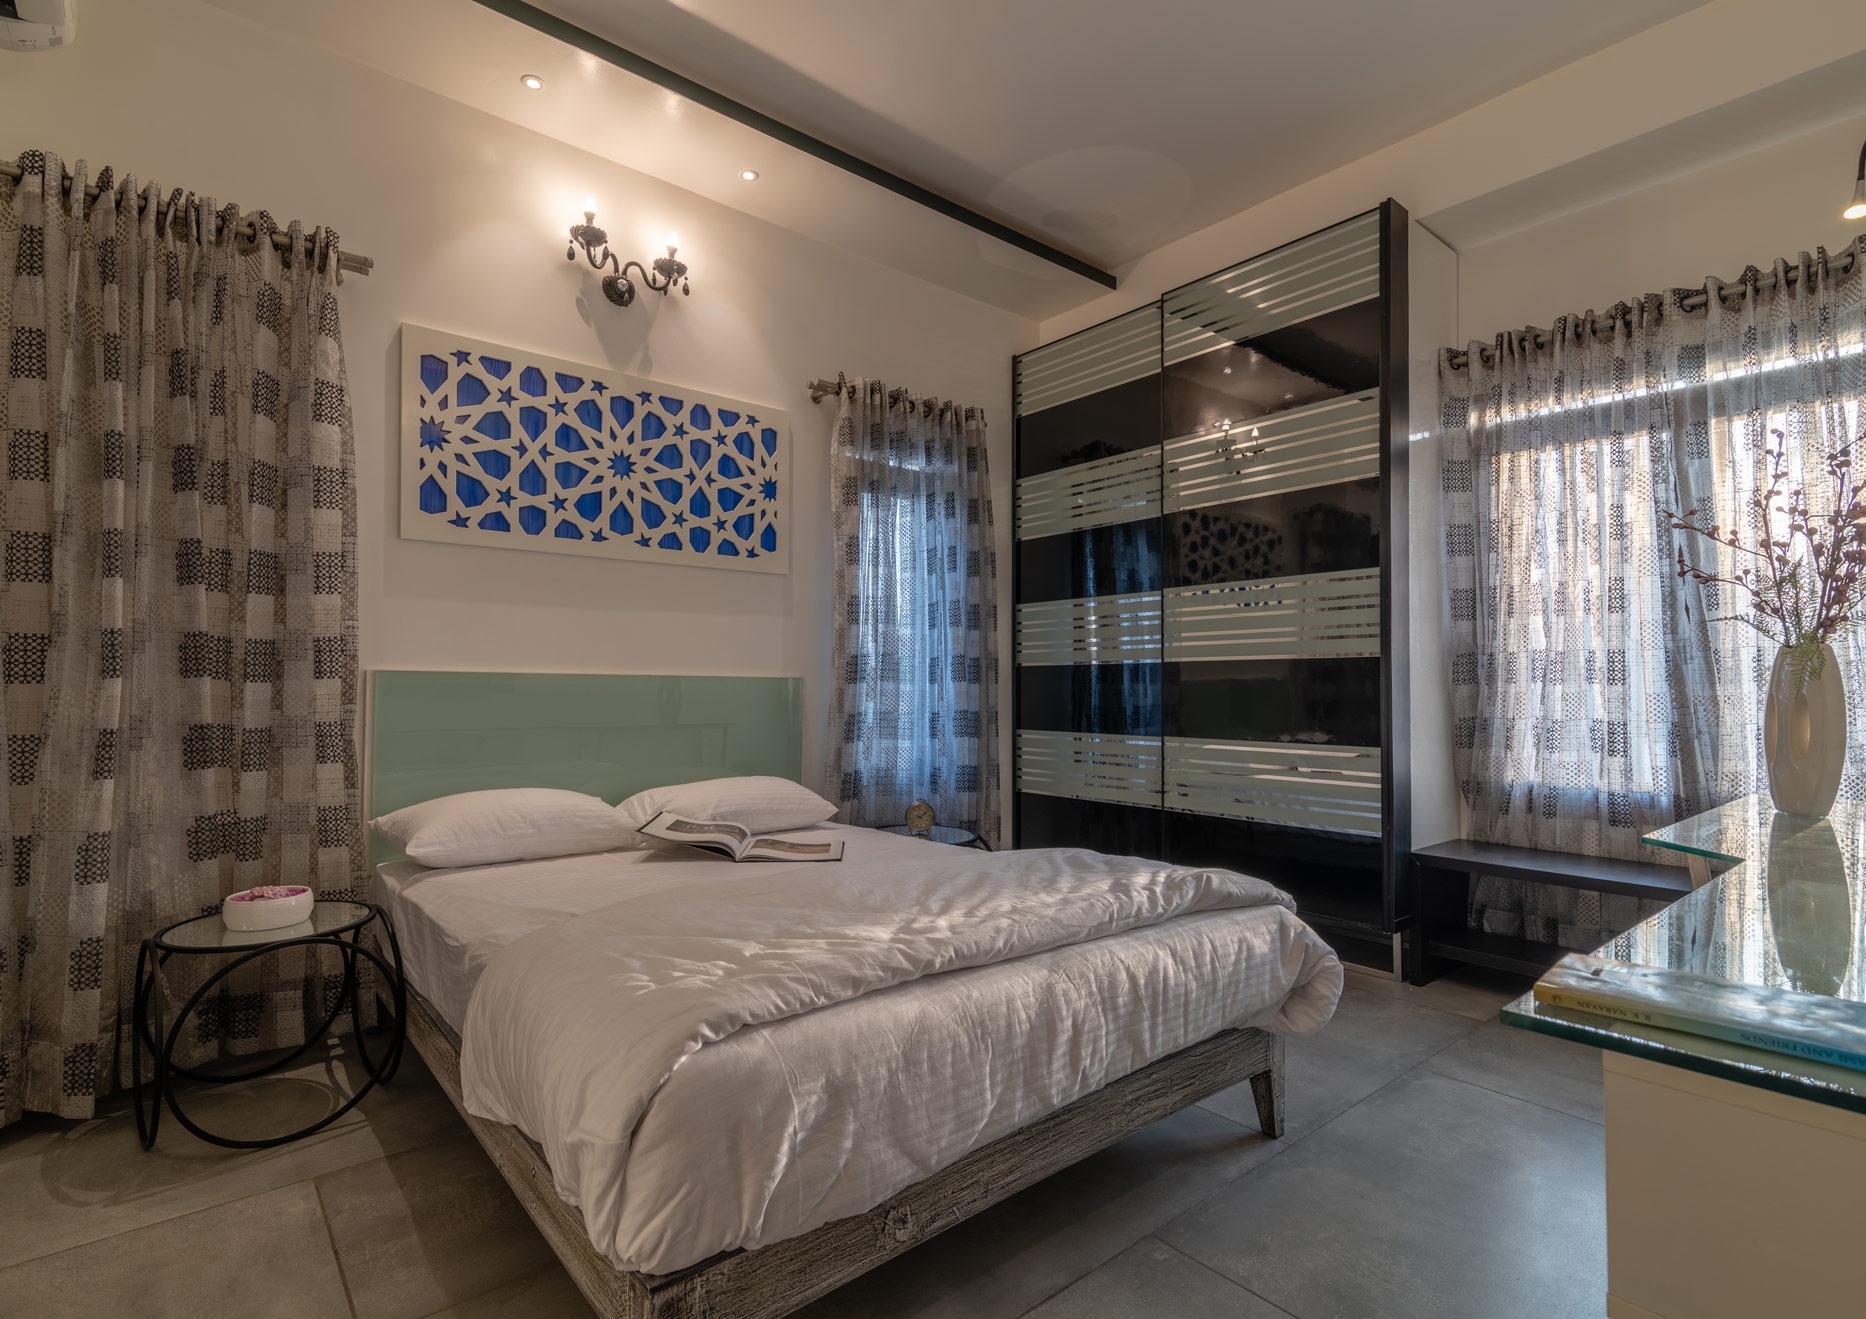 The Obsidian Bedroom in the Glass apartment at the Jazminn, luxury service apartments in Bangalore